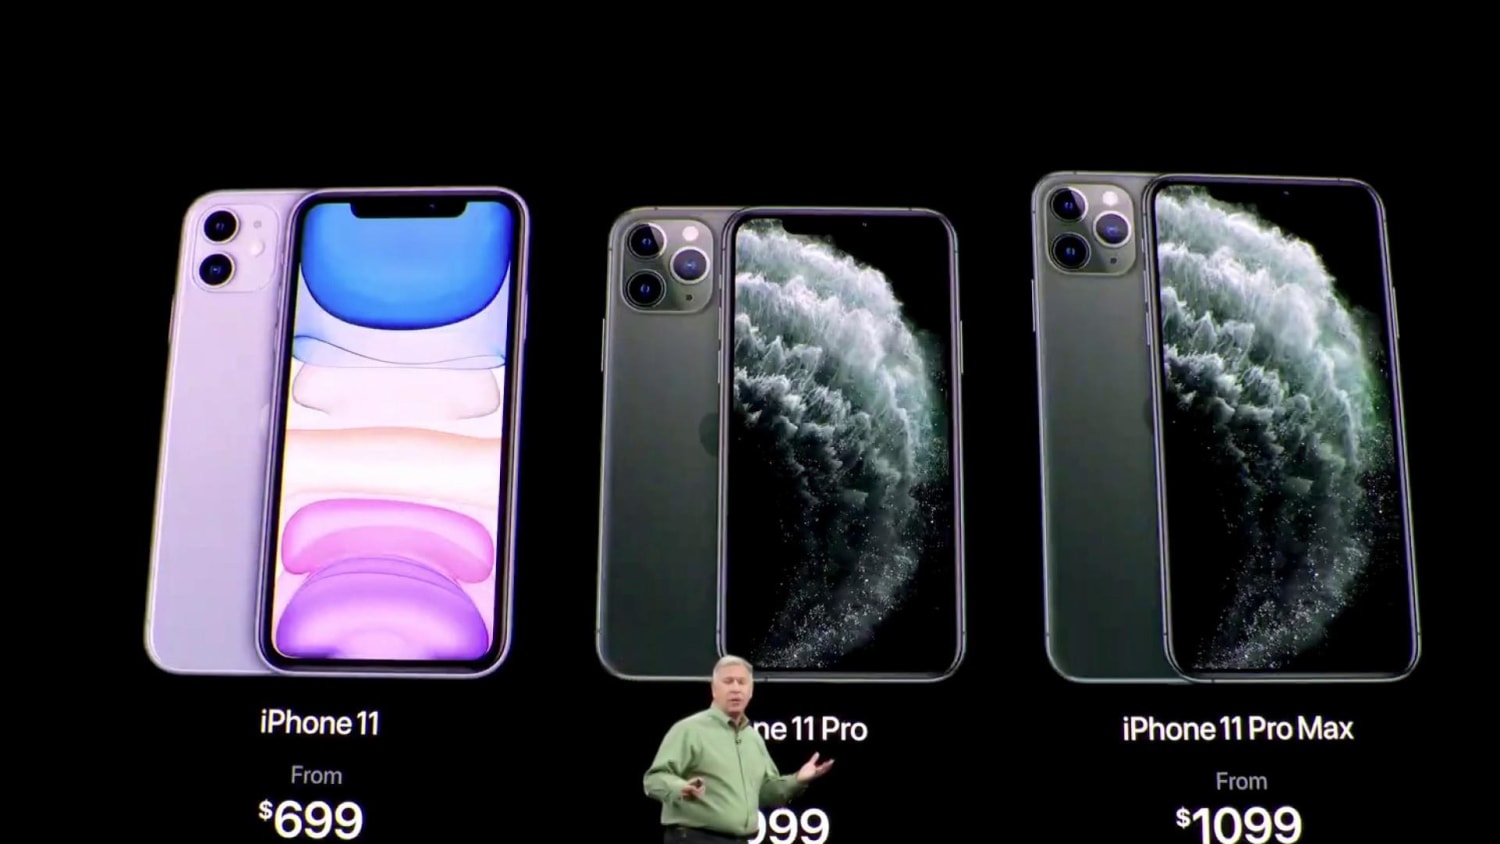 Apple iPhone 11 Pro with triple-camera system unveiled